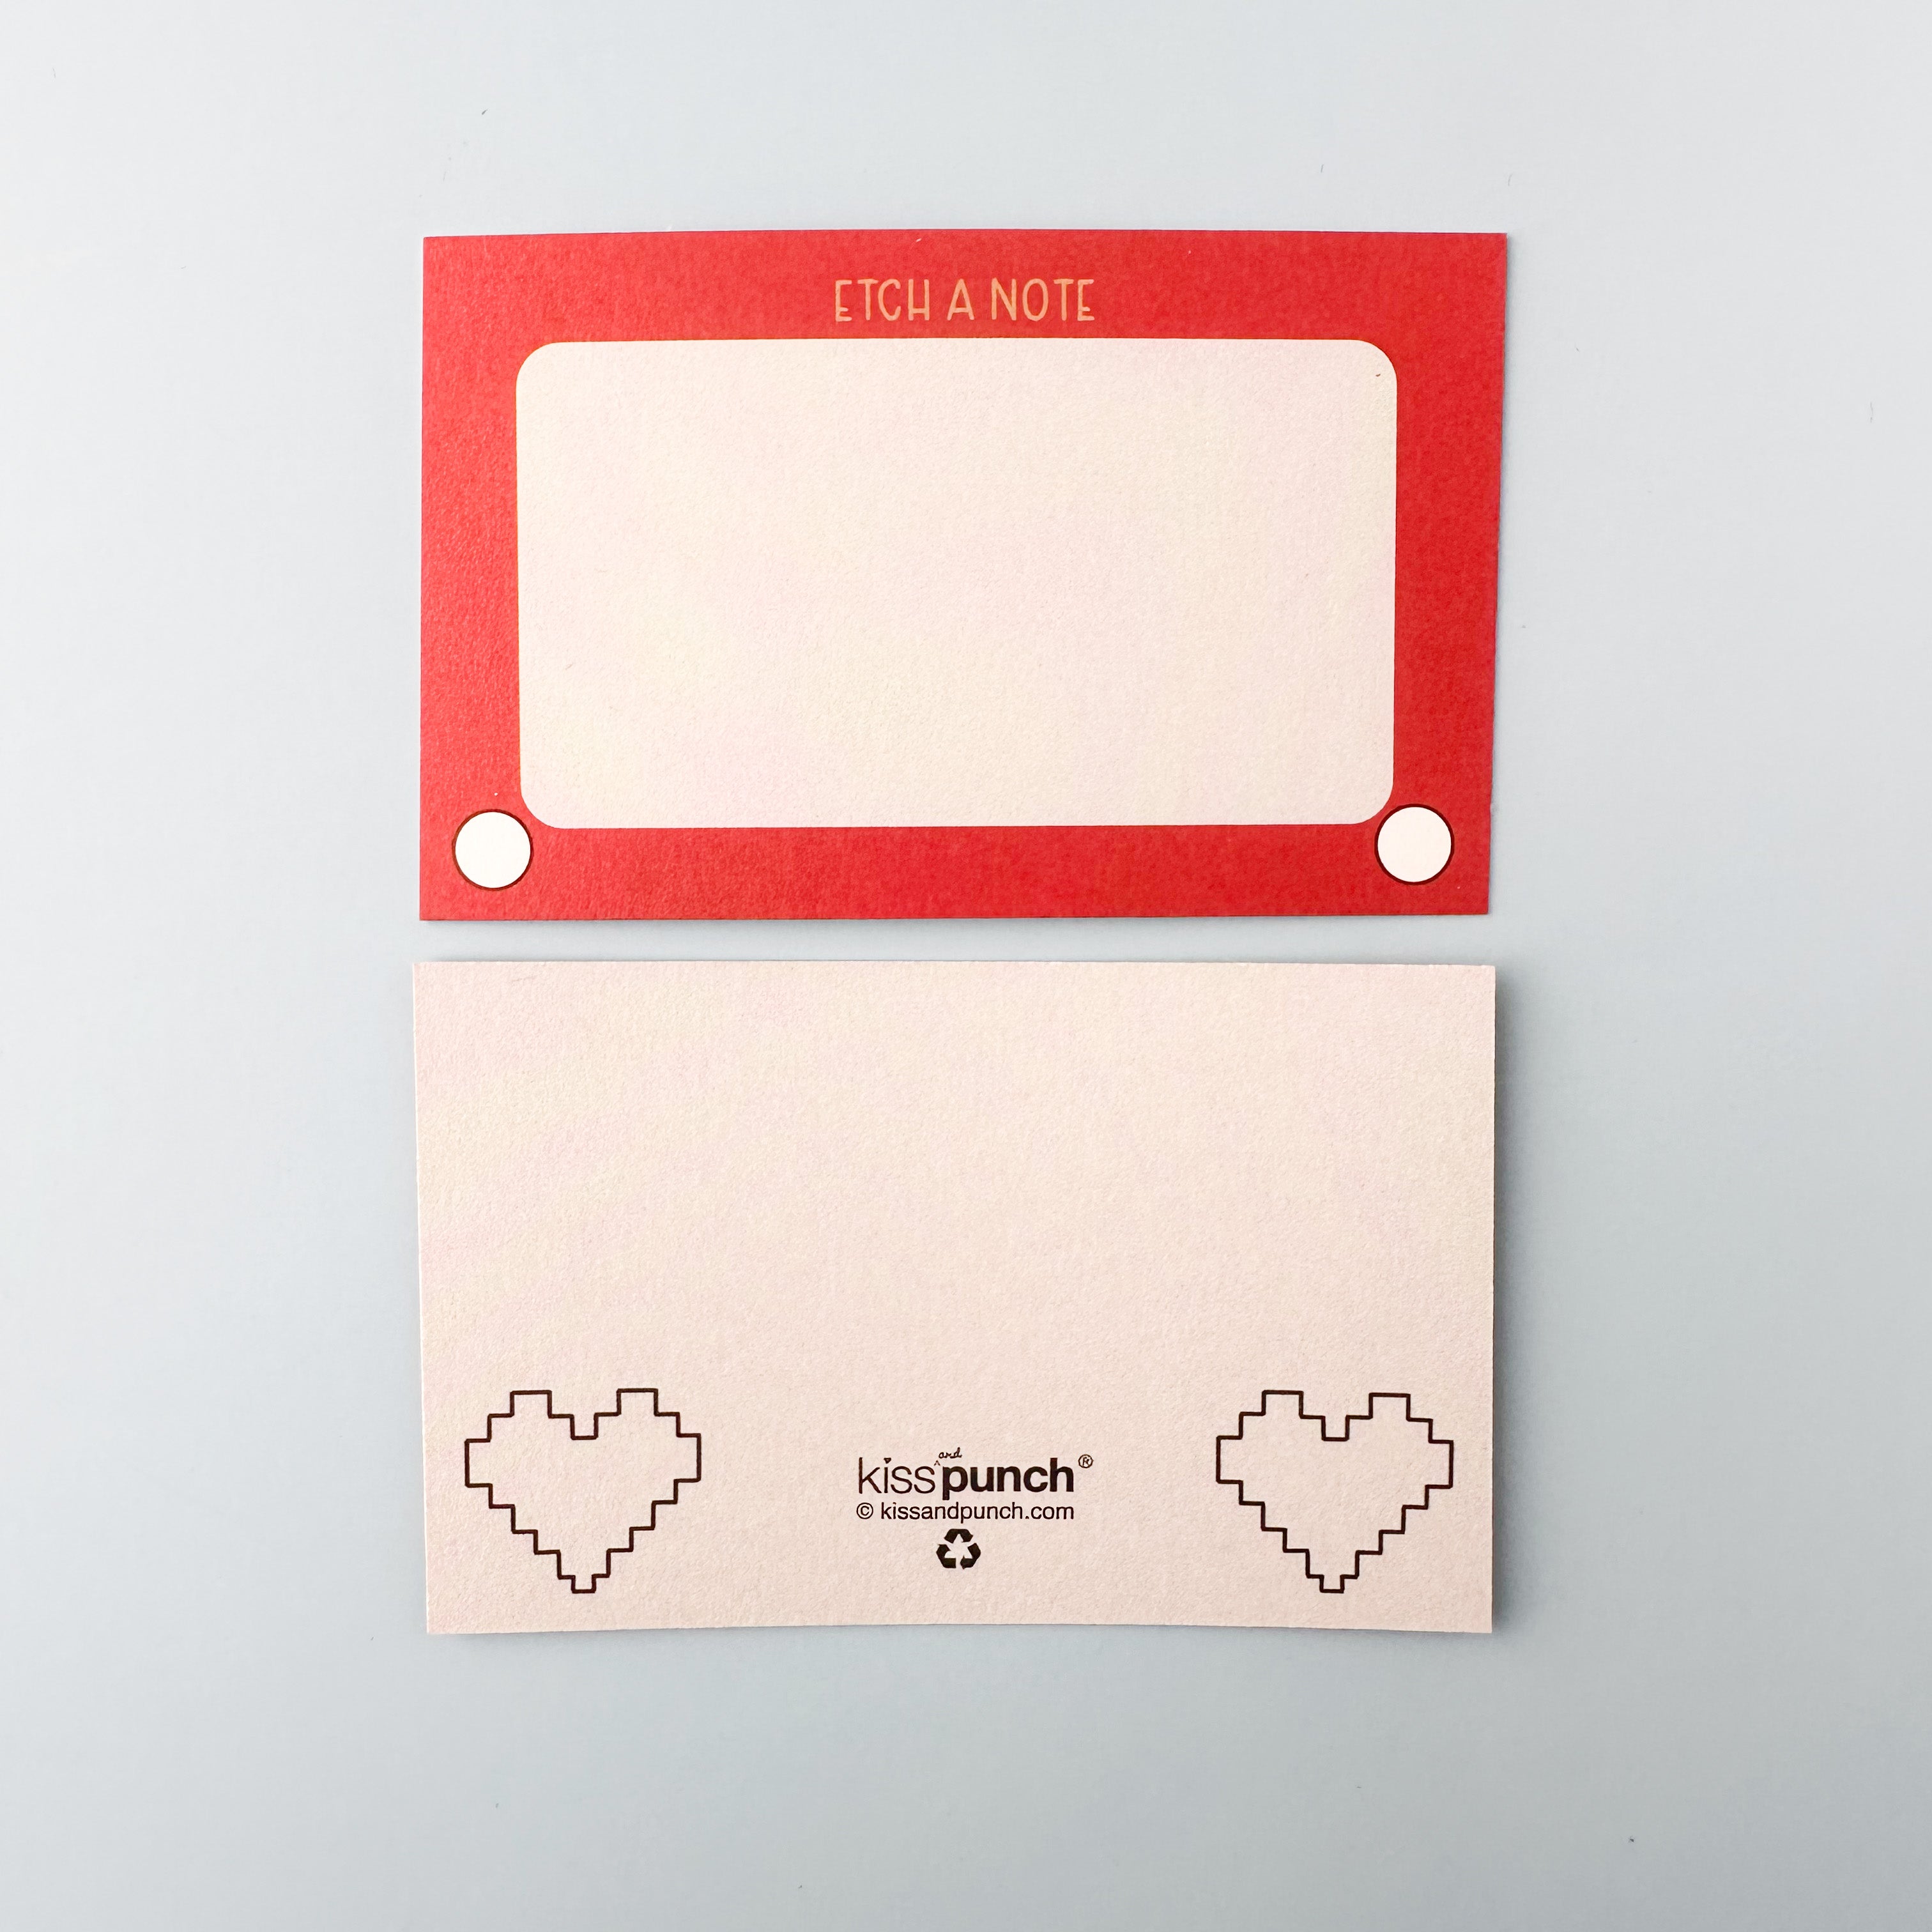 Rediscover nostalgia with our Etch a Sketch Mini Notecards, featuring charming illustrations inspired by the classic toy. Ideal for adding a playful and retro touch to your notes and messages. These notecards from Kiss Punch are sold at BBB Supplies Craft Shop.